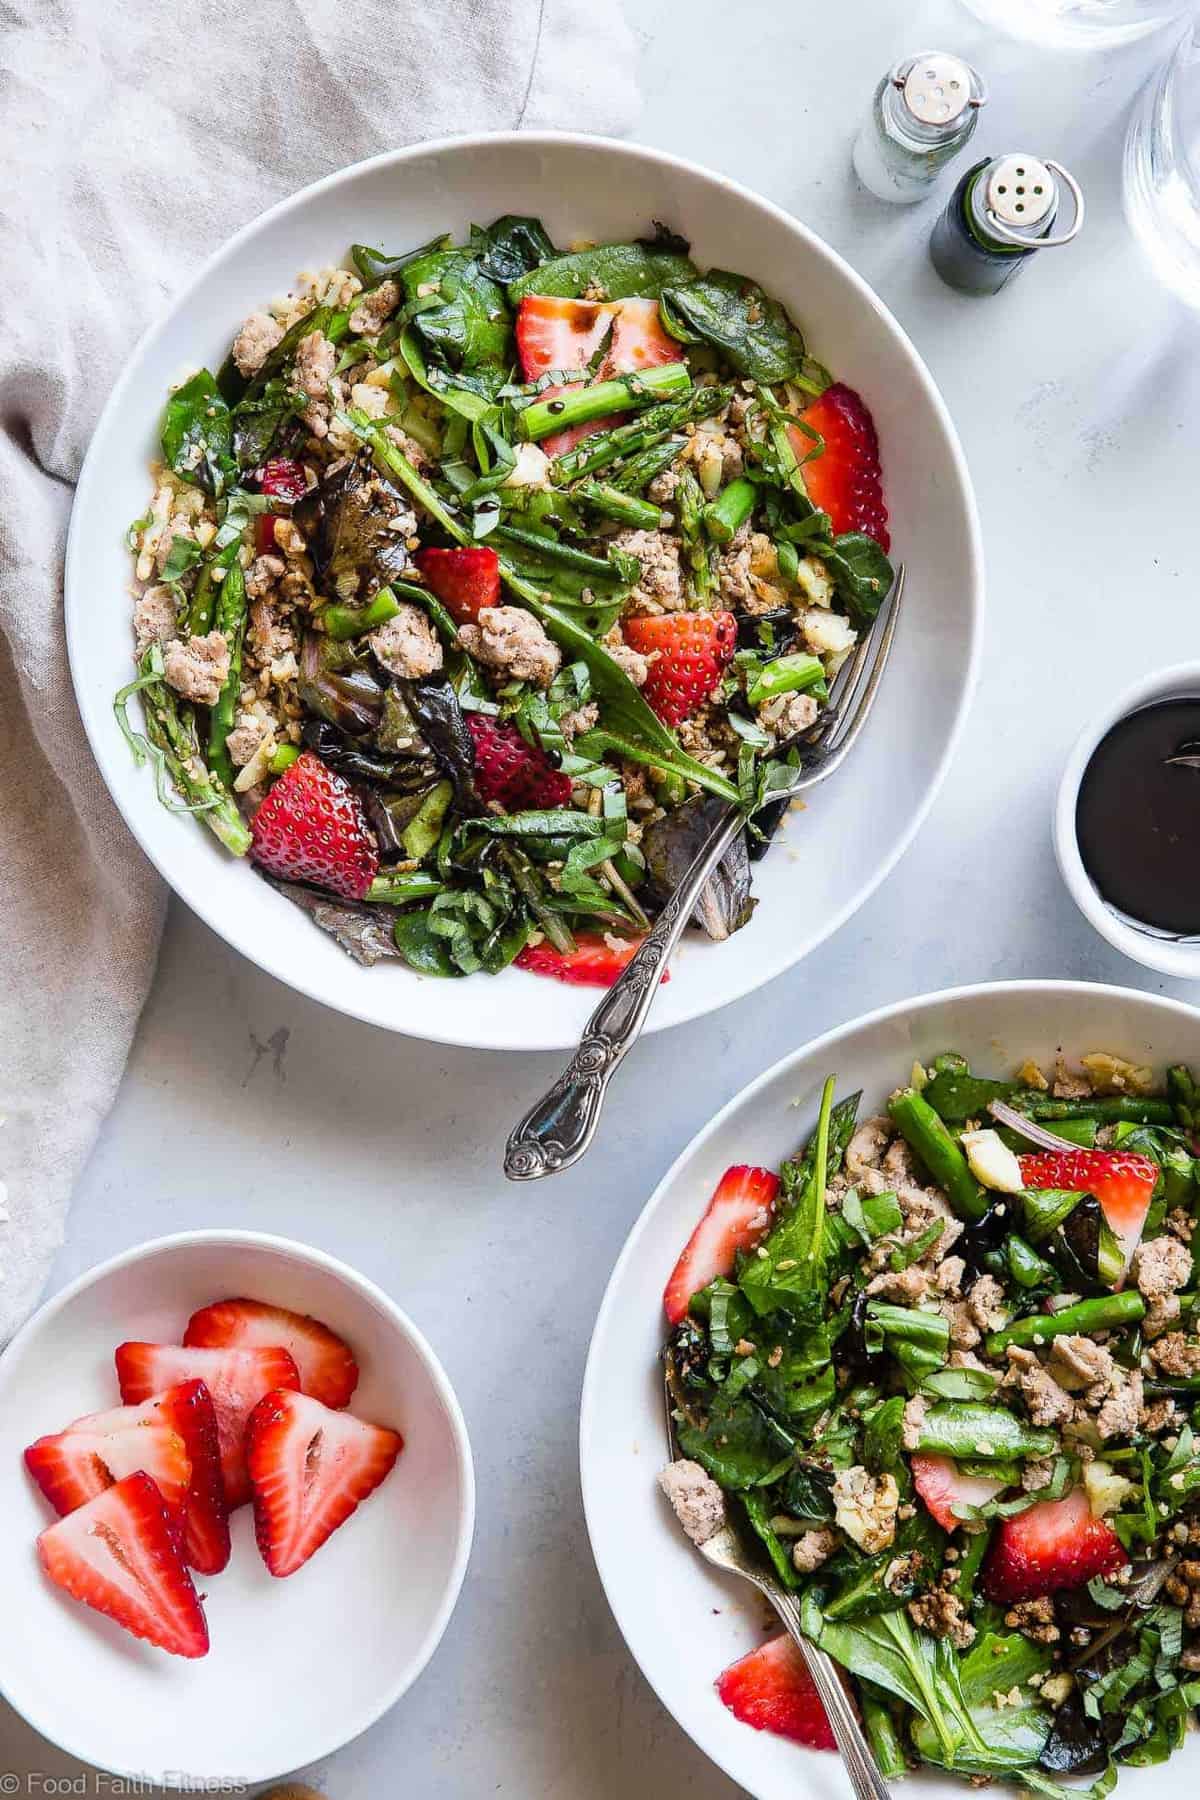 Paleo Strawberry Balsamic Cauliflower Turkey Skillet - These easy, weeknight dinner is loaded with sweet and tangy summer flavors! It's a unique, protein packed dinner that is gluten, grain and dairy free and only 300 calories! | #Foodfaithfitness.com | #Paleo #Glutenfree #Healthy #Dairyfree #Grainfree